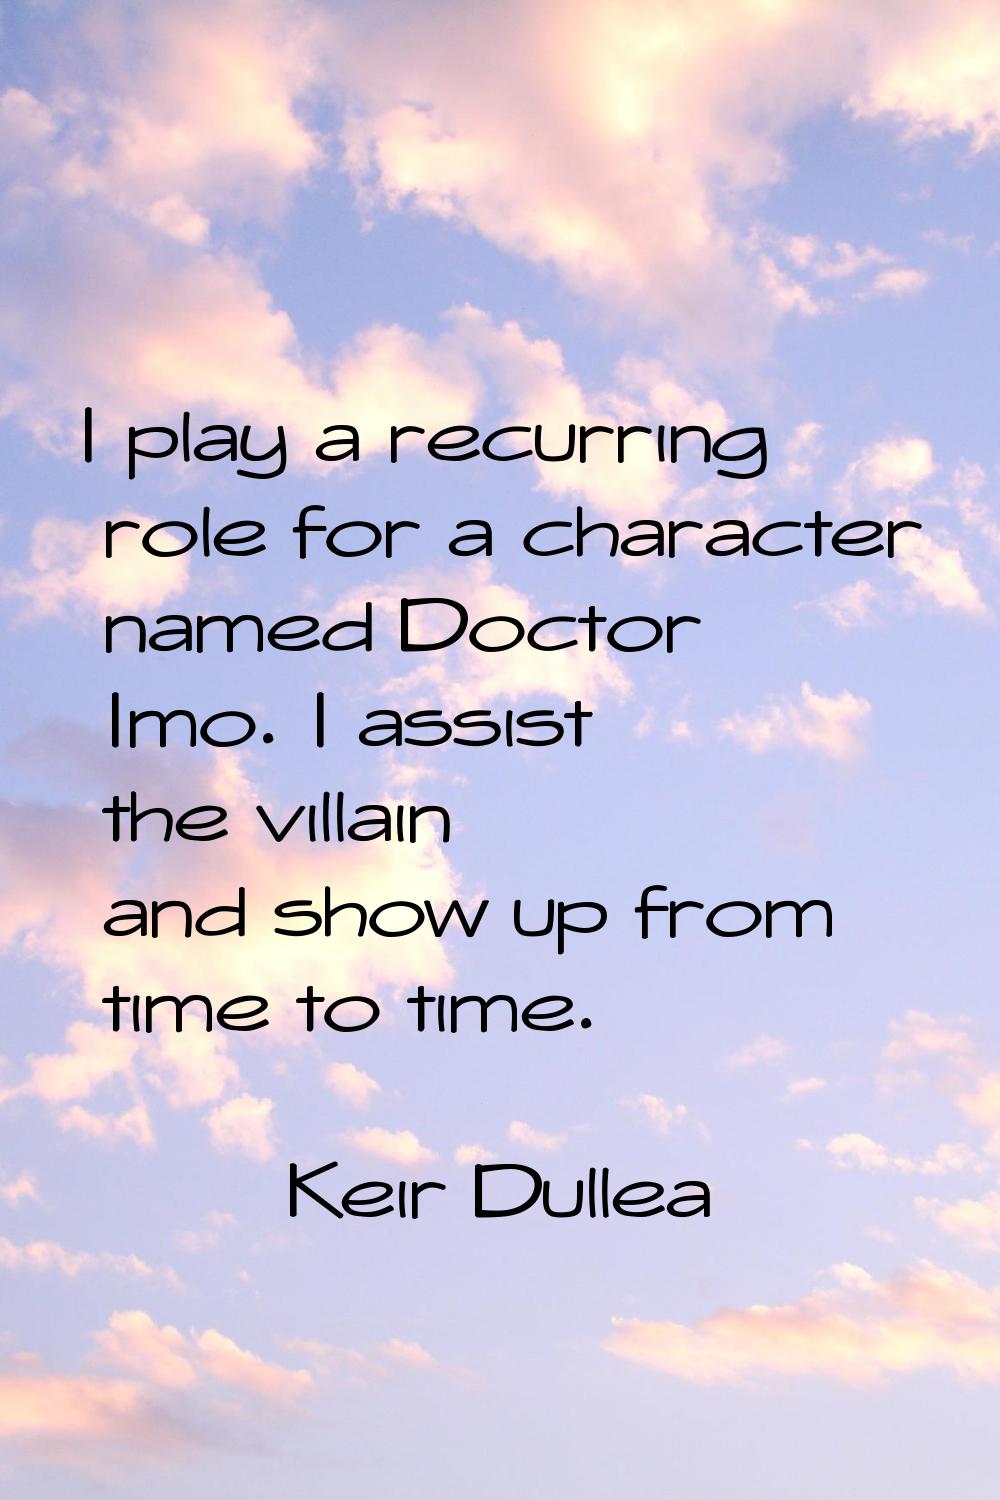 I play a recurring role for a character named Doctor Imo. I assist the villain and show up from tim